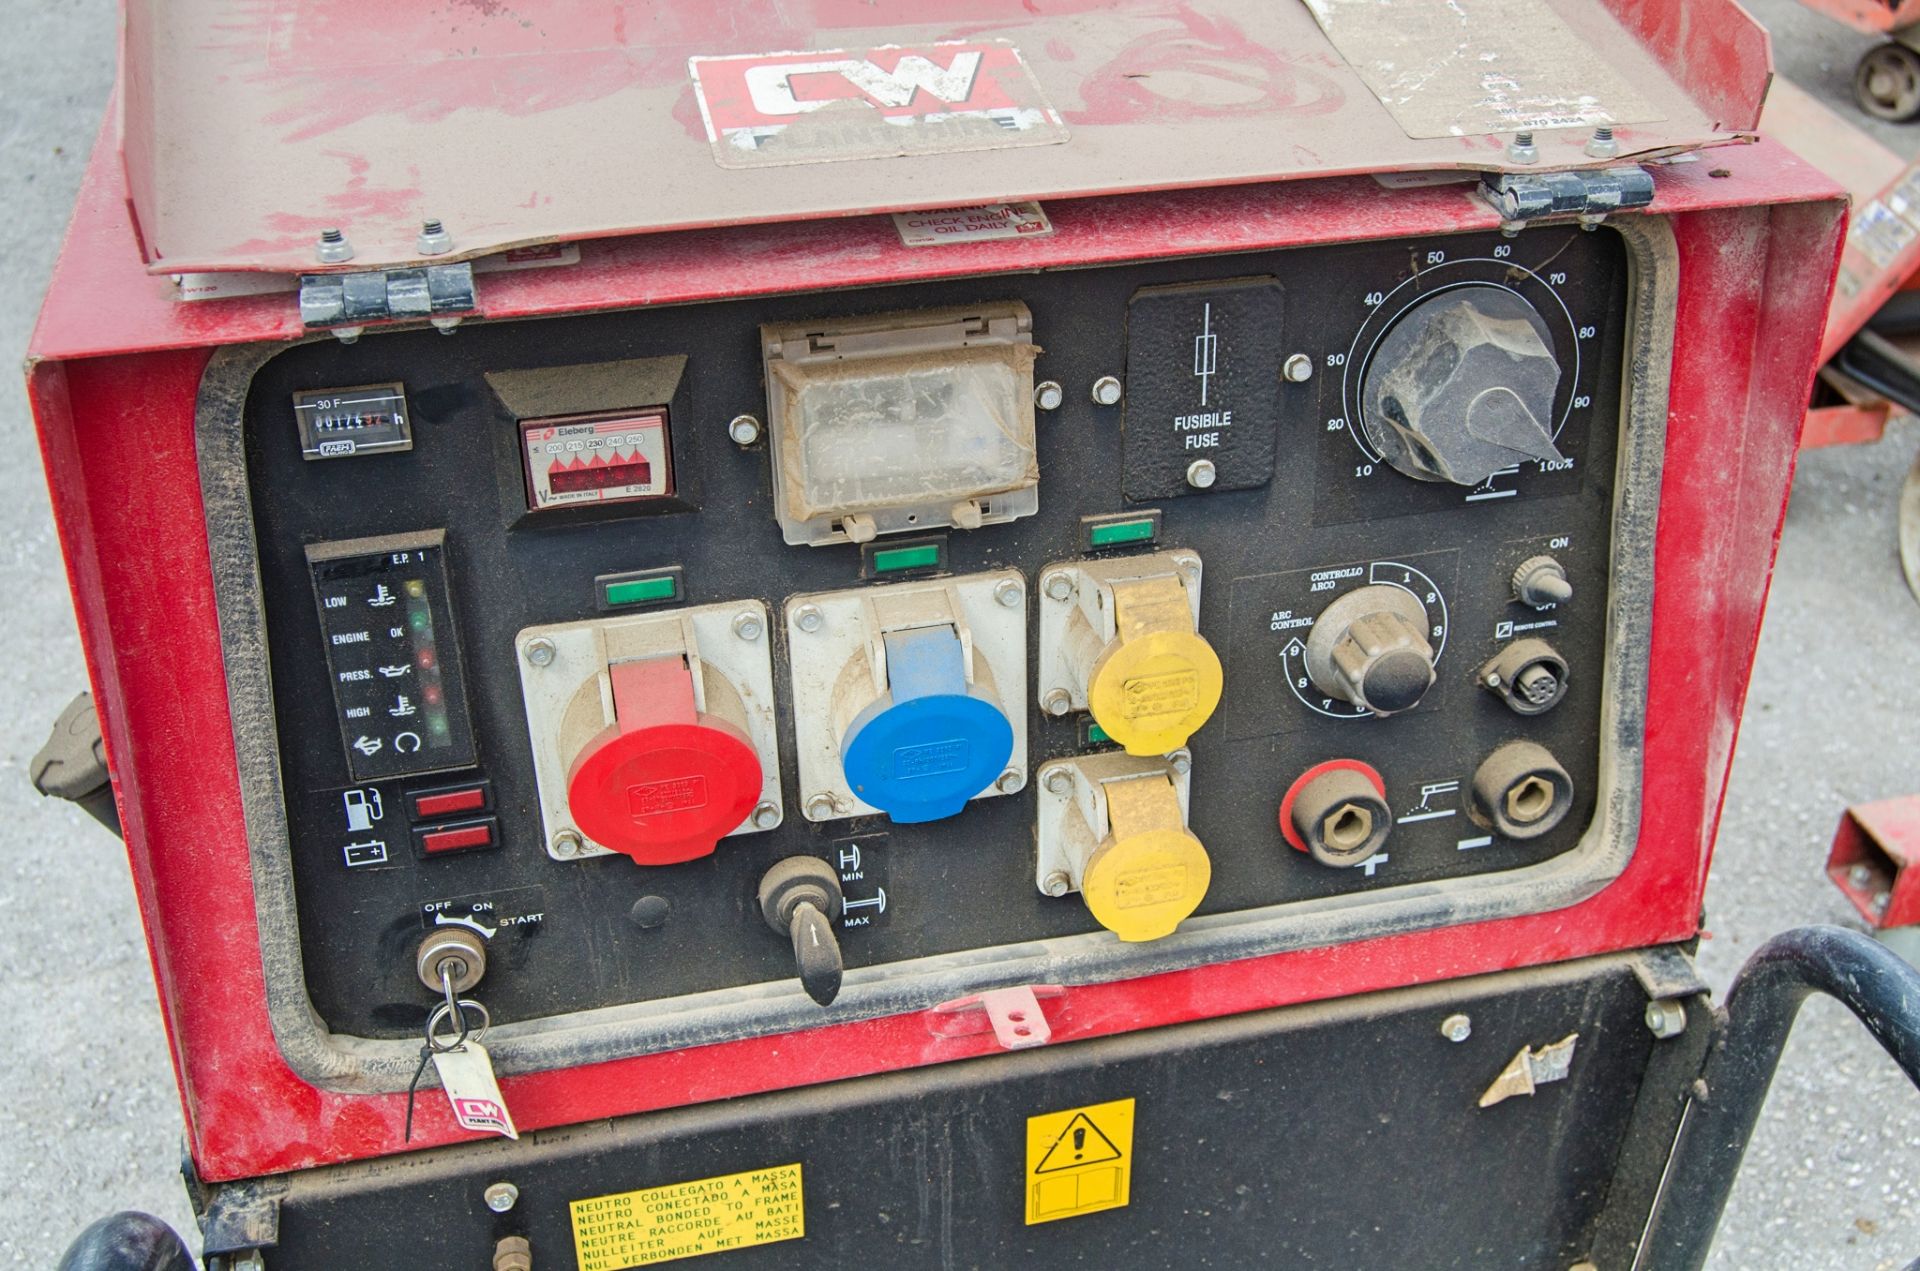 Mosa TS399 10 kva diesel driven welder/generator Year: 2019 S/N: 75341 Recorded Hours: 174 - Image 3 of 4